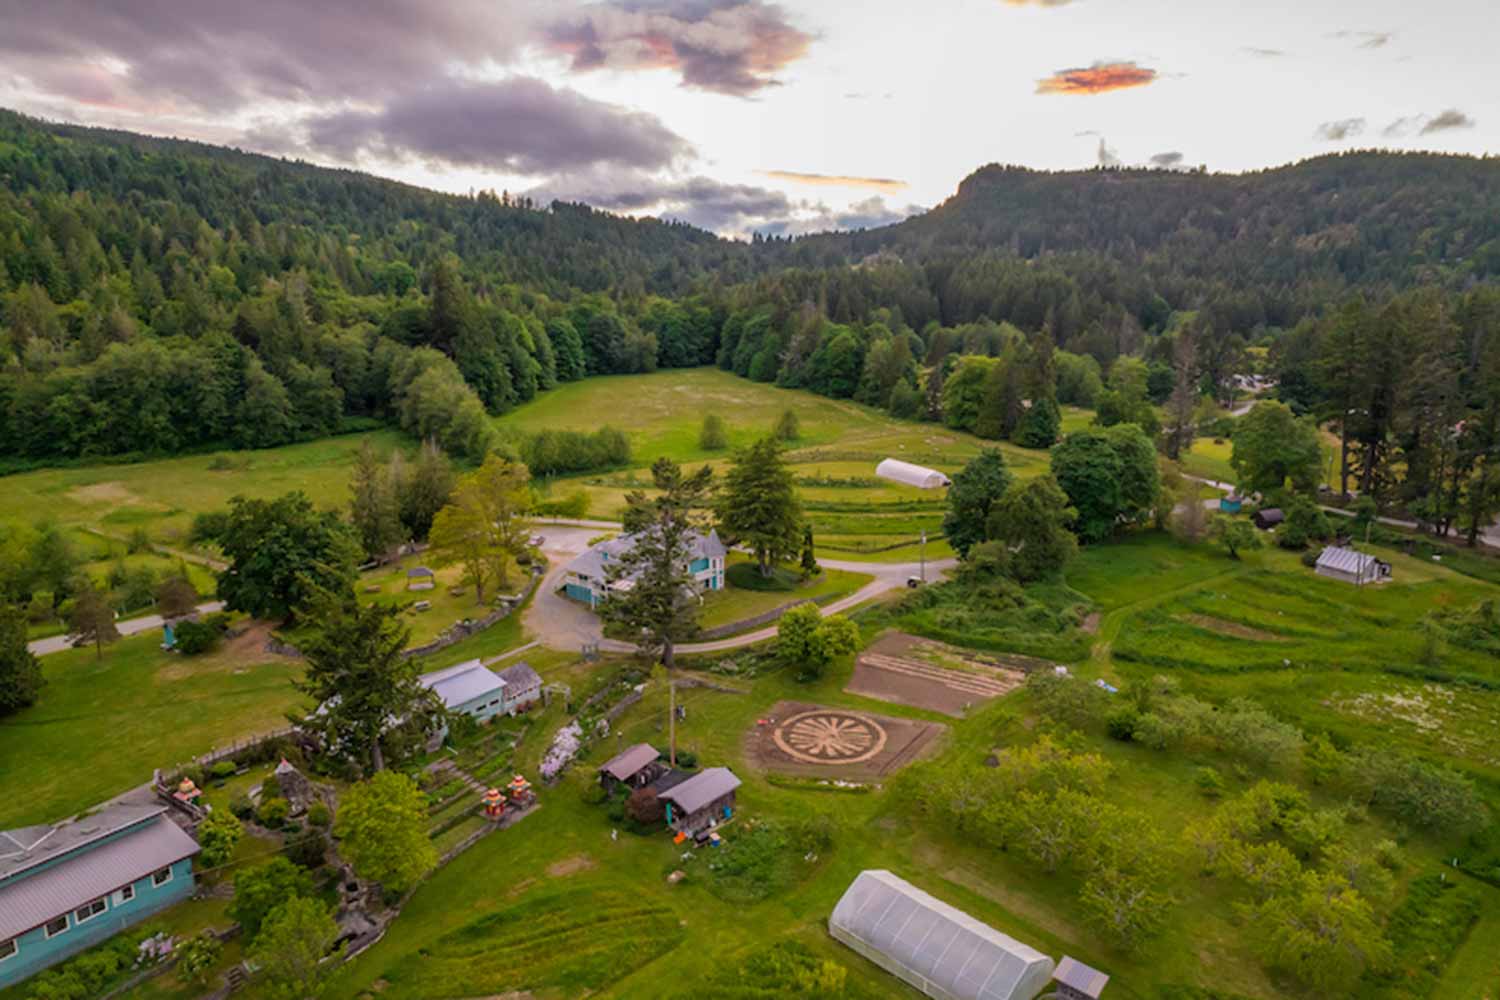 Photo from above The Salt Spring Centre of Yoga